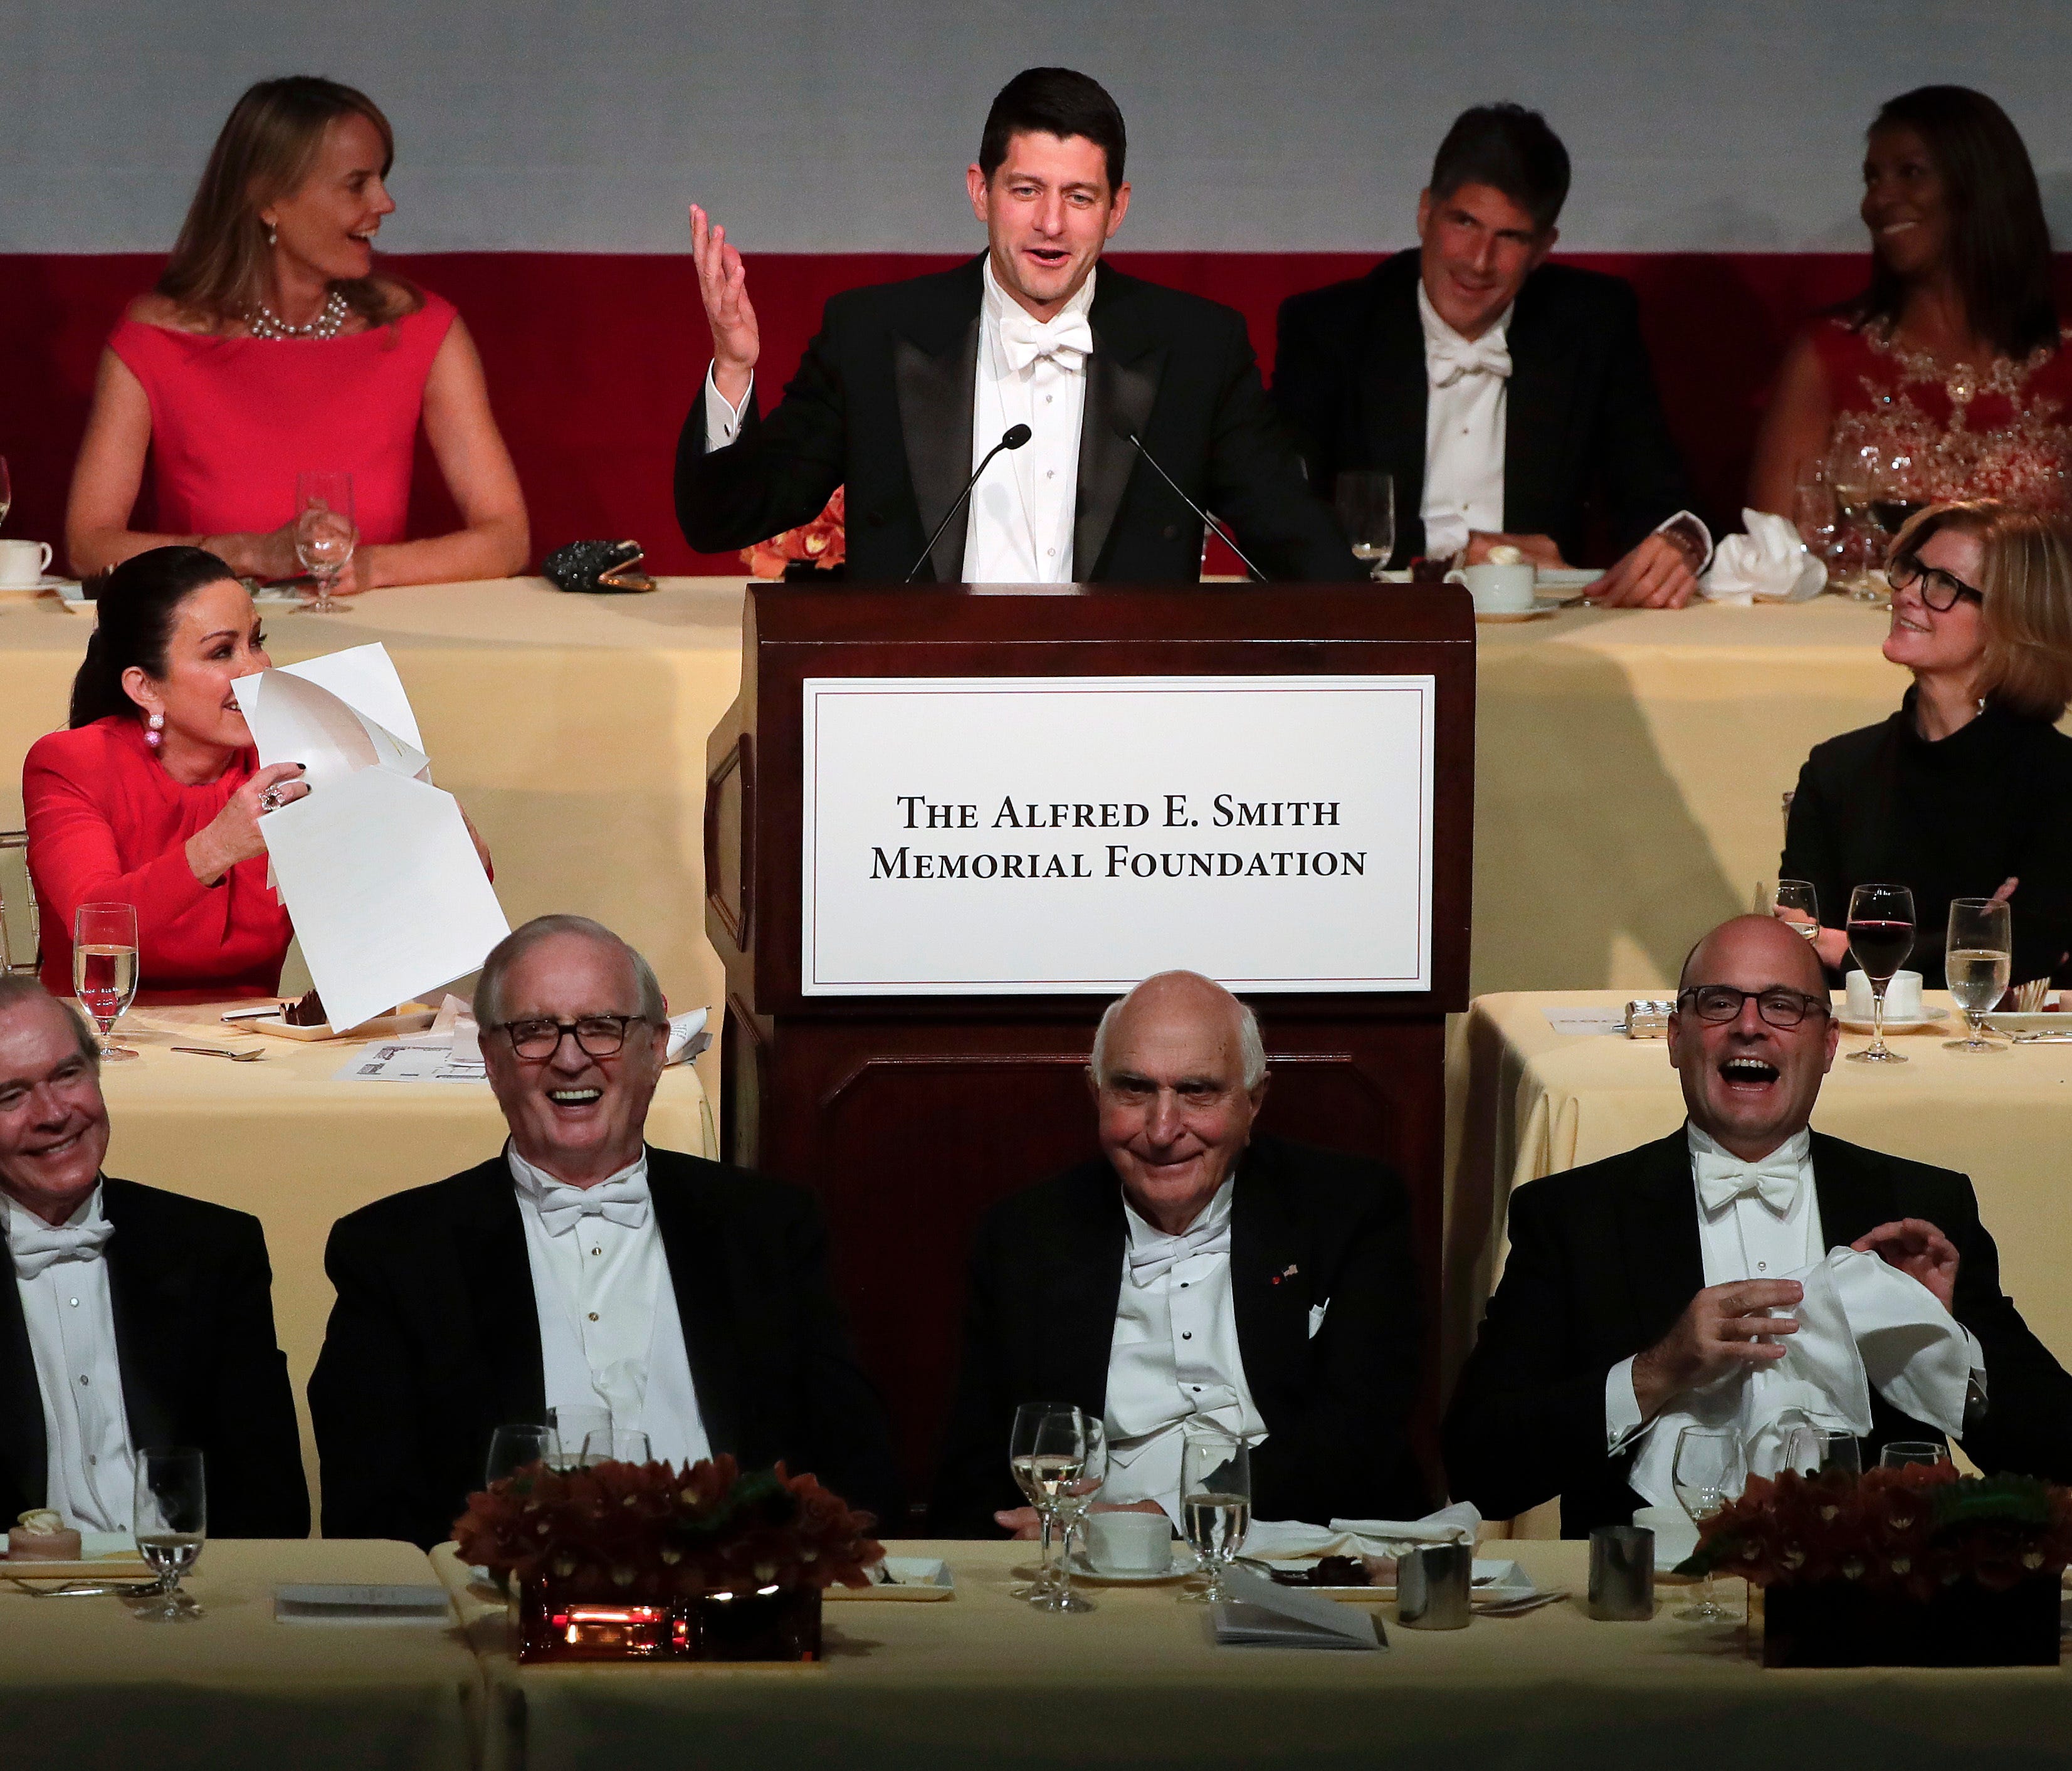 Speaker of the House Paul Ryan, R-Wis., speaks during the 72nd Annual Alfred E. Smith Memorial Foundation dinner, Oct. 19, 2017, in New York.